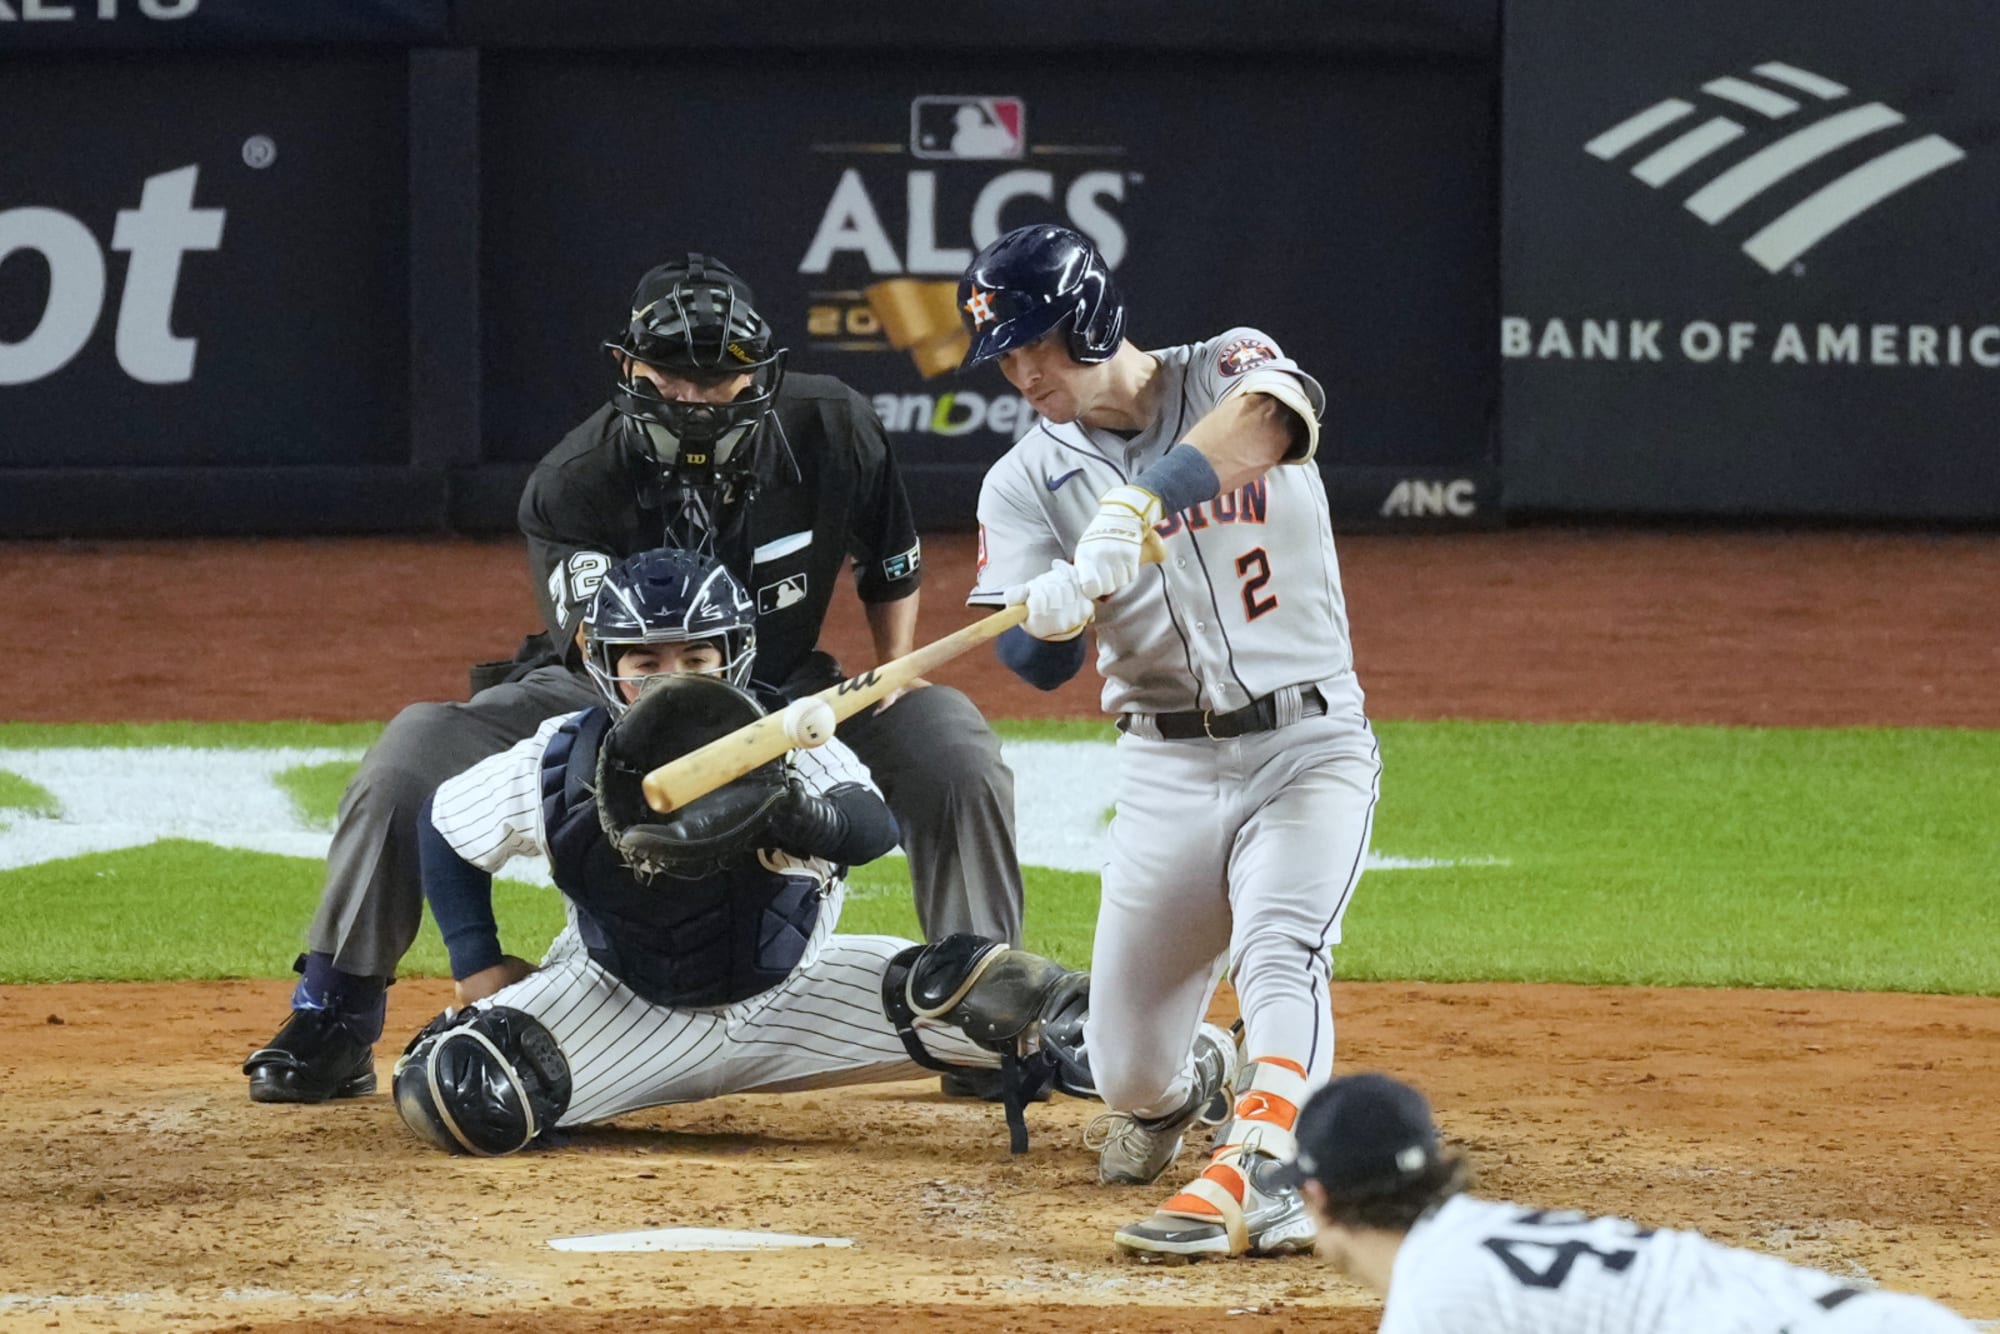 Jeremy Pena Preview, Player Props: Astros vs. Rangers - ALCS Game 4